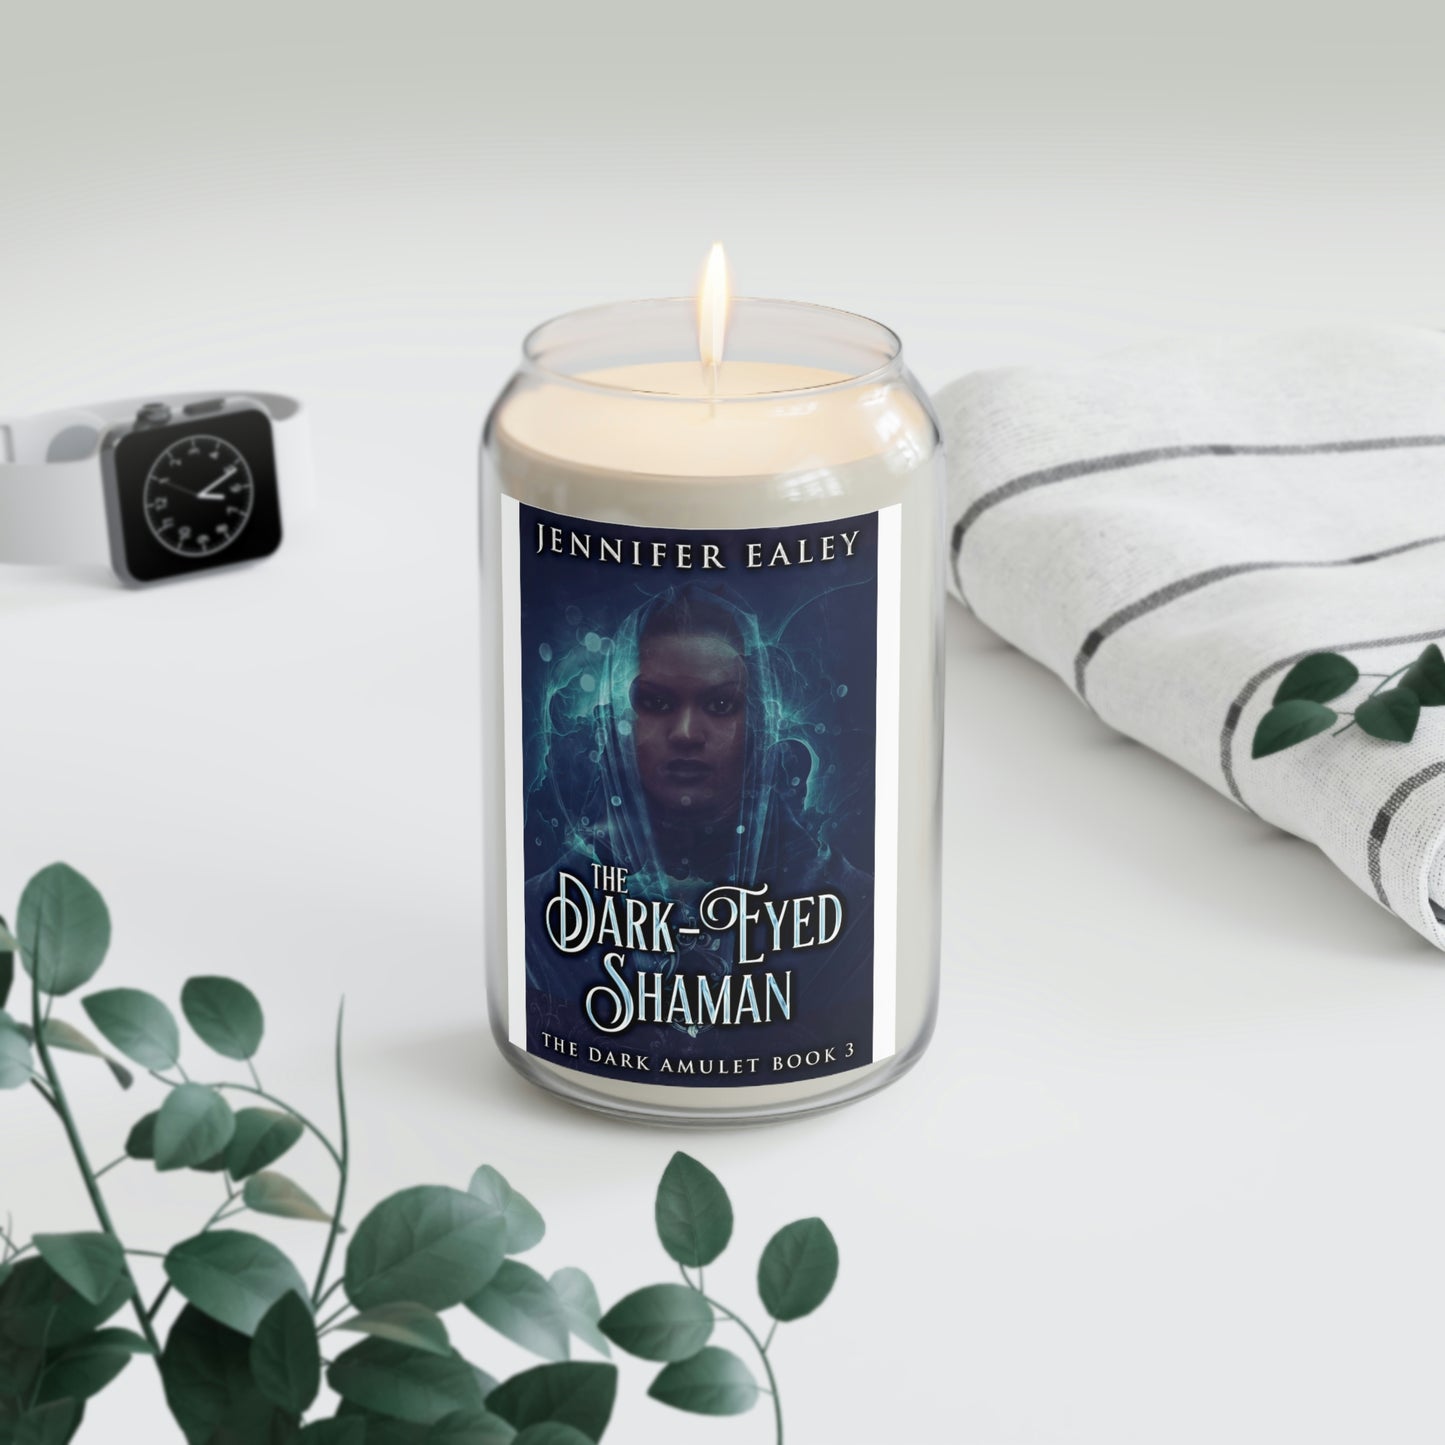 The Dark-Eyed Shaman - Scented Candle